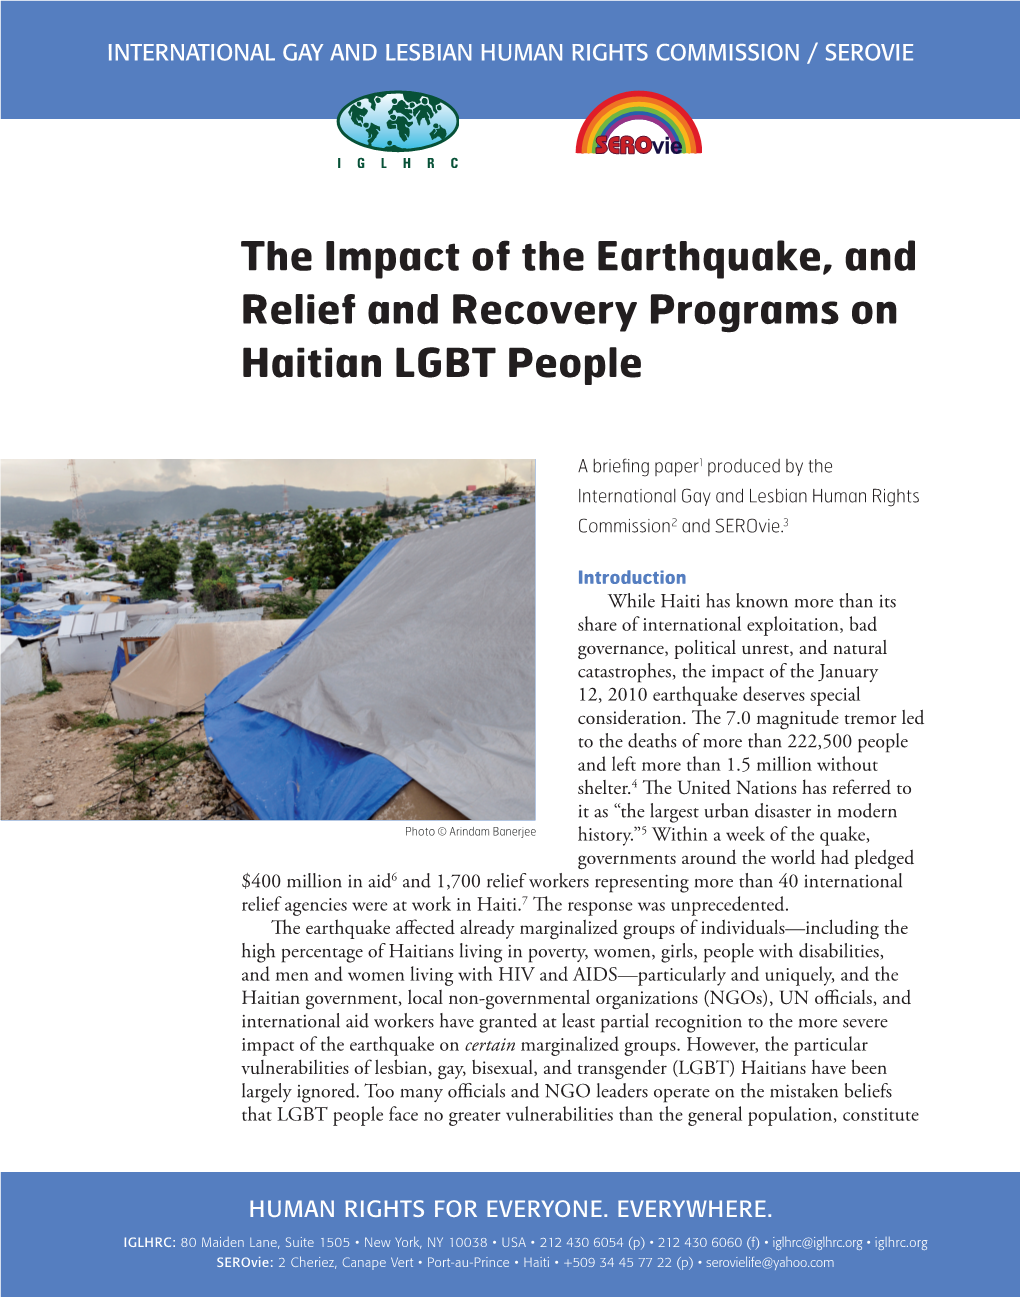 The Impact of the Earthquake, and Relief and Recovery Programs on Haitian LGBT People